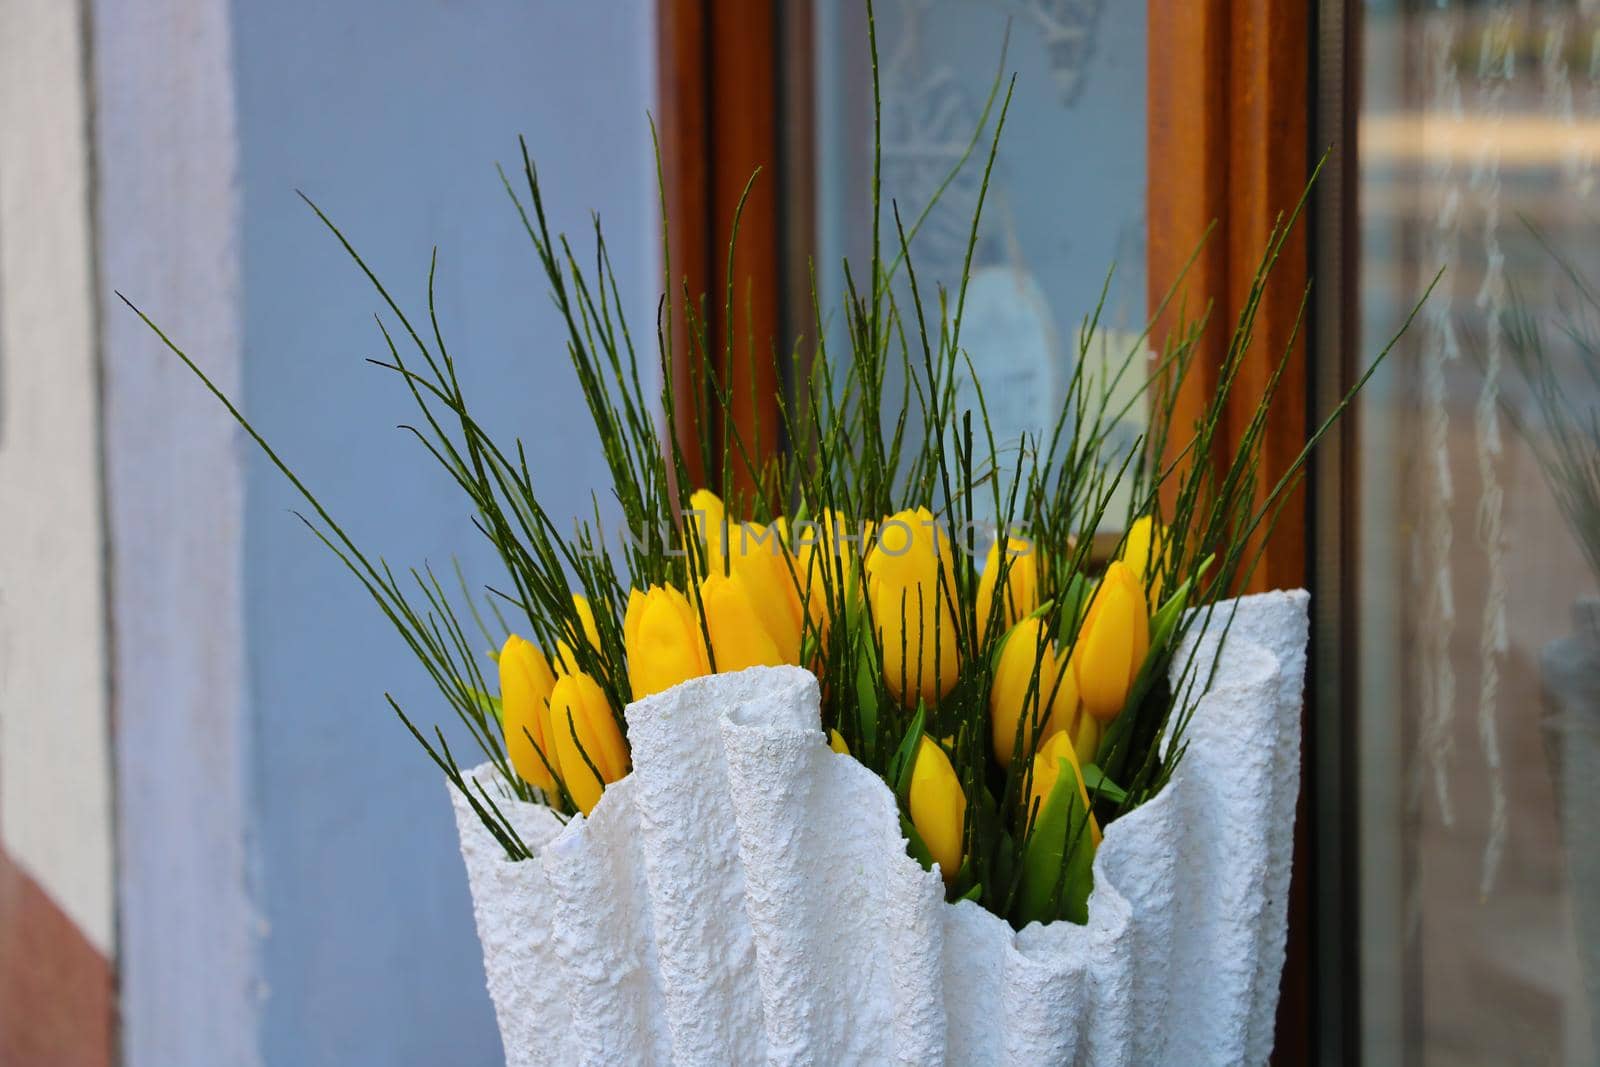 There is a bouquet of yellow tulips in a vase on the window